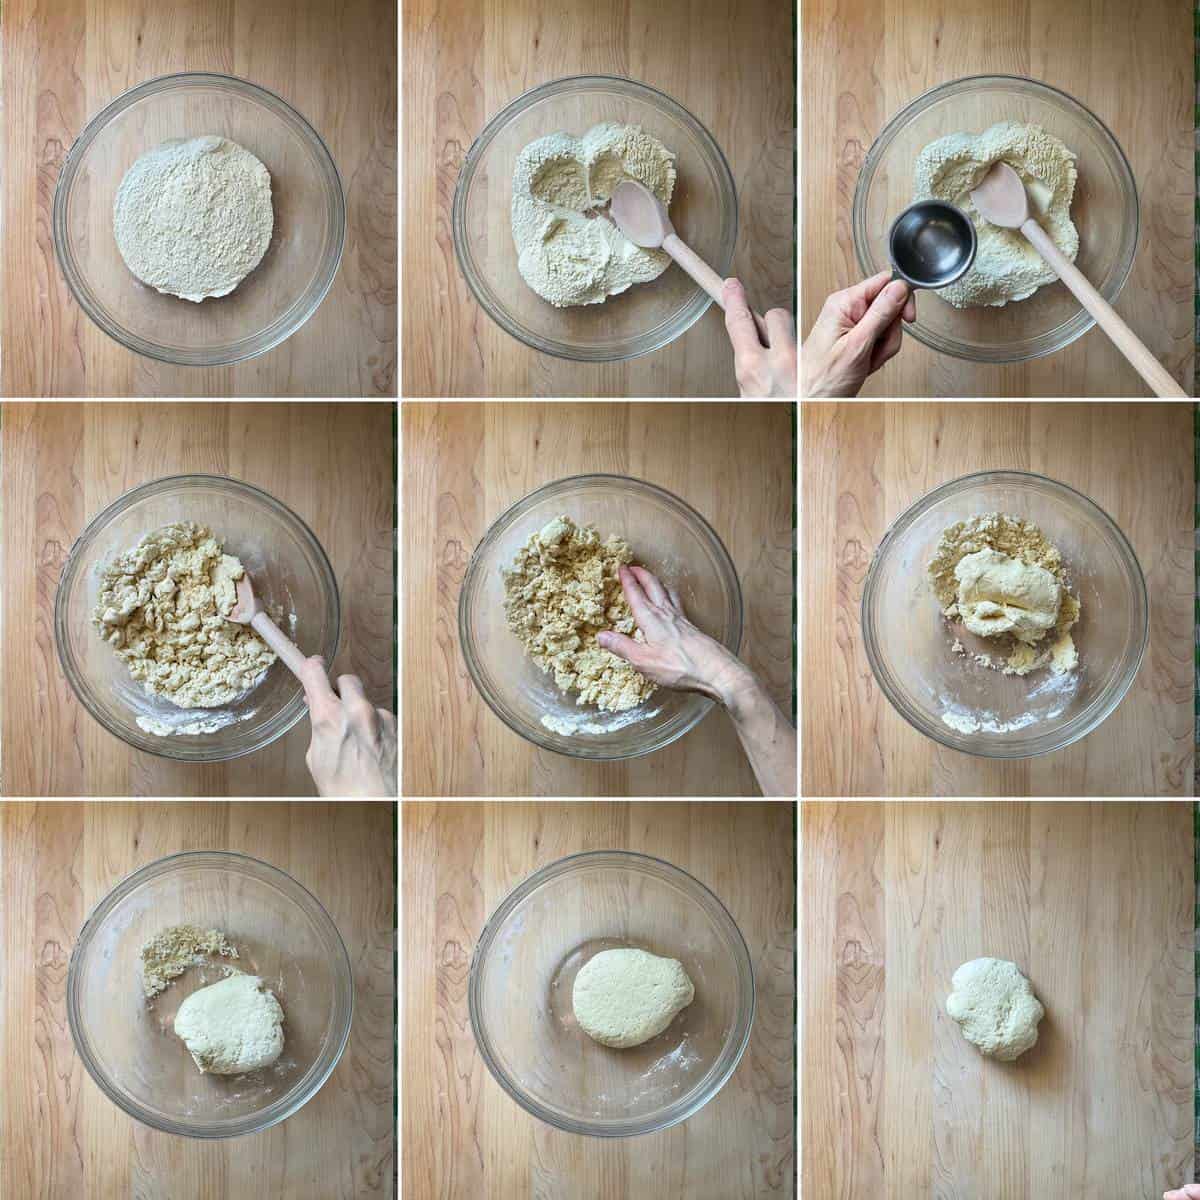 Step by step photos of how to make the cavatelli dough.